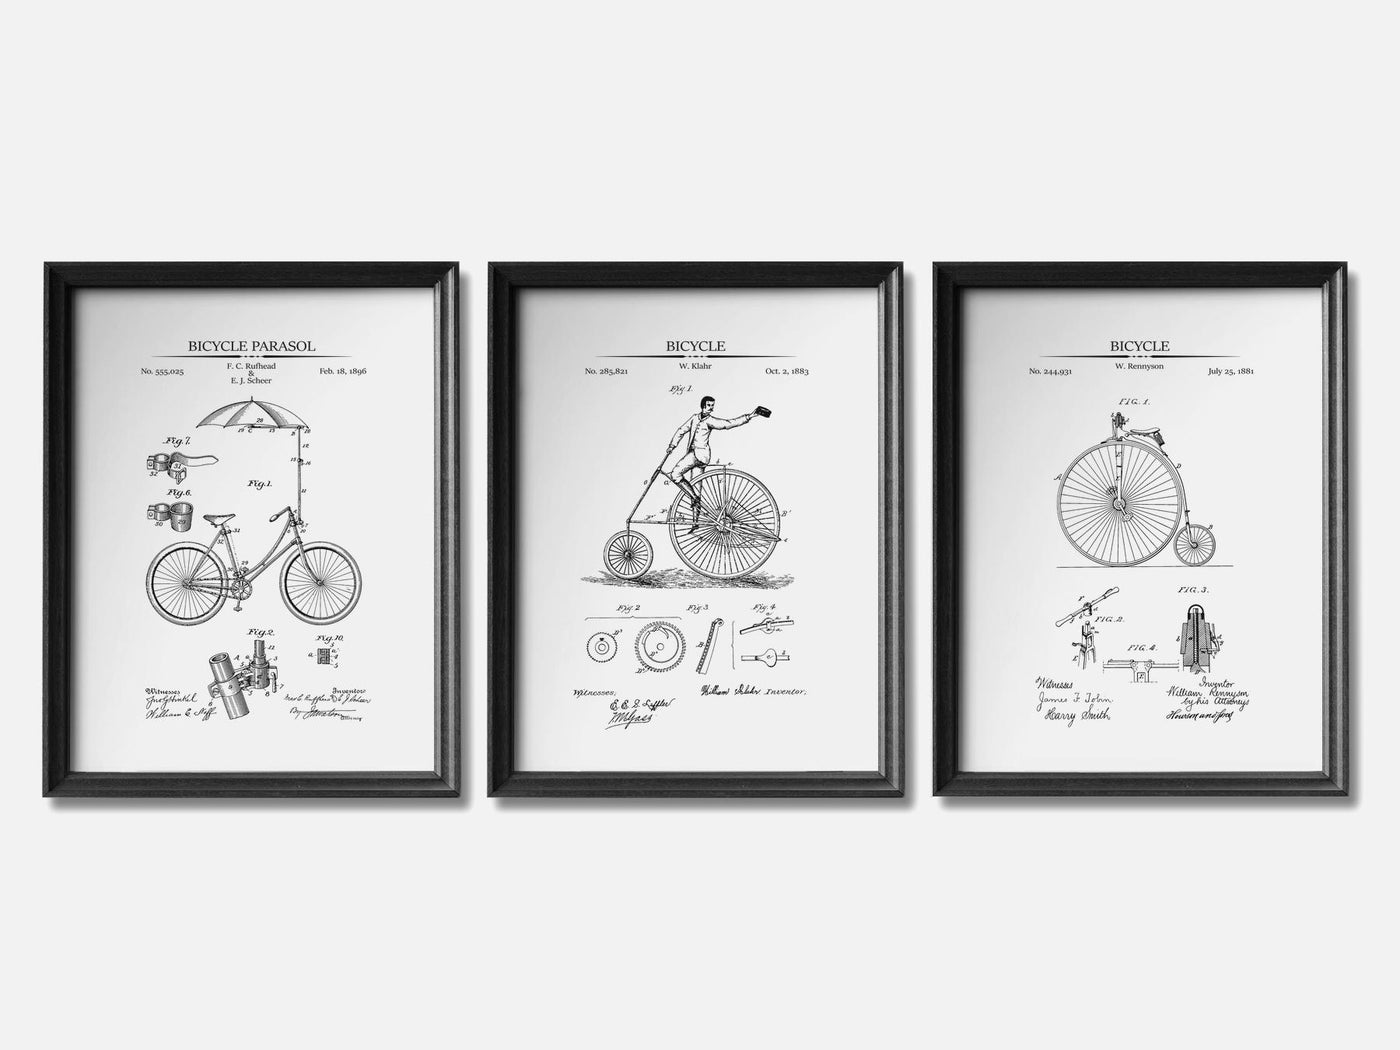 Vintage Bicycle Patent Print Set of 3 mockup - A_t10125-V1-PC_F+B-SS_3-PS_11x14-C_whi variant